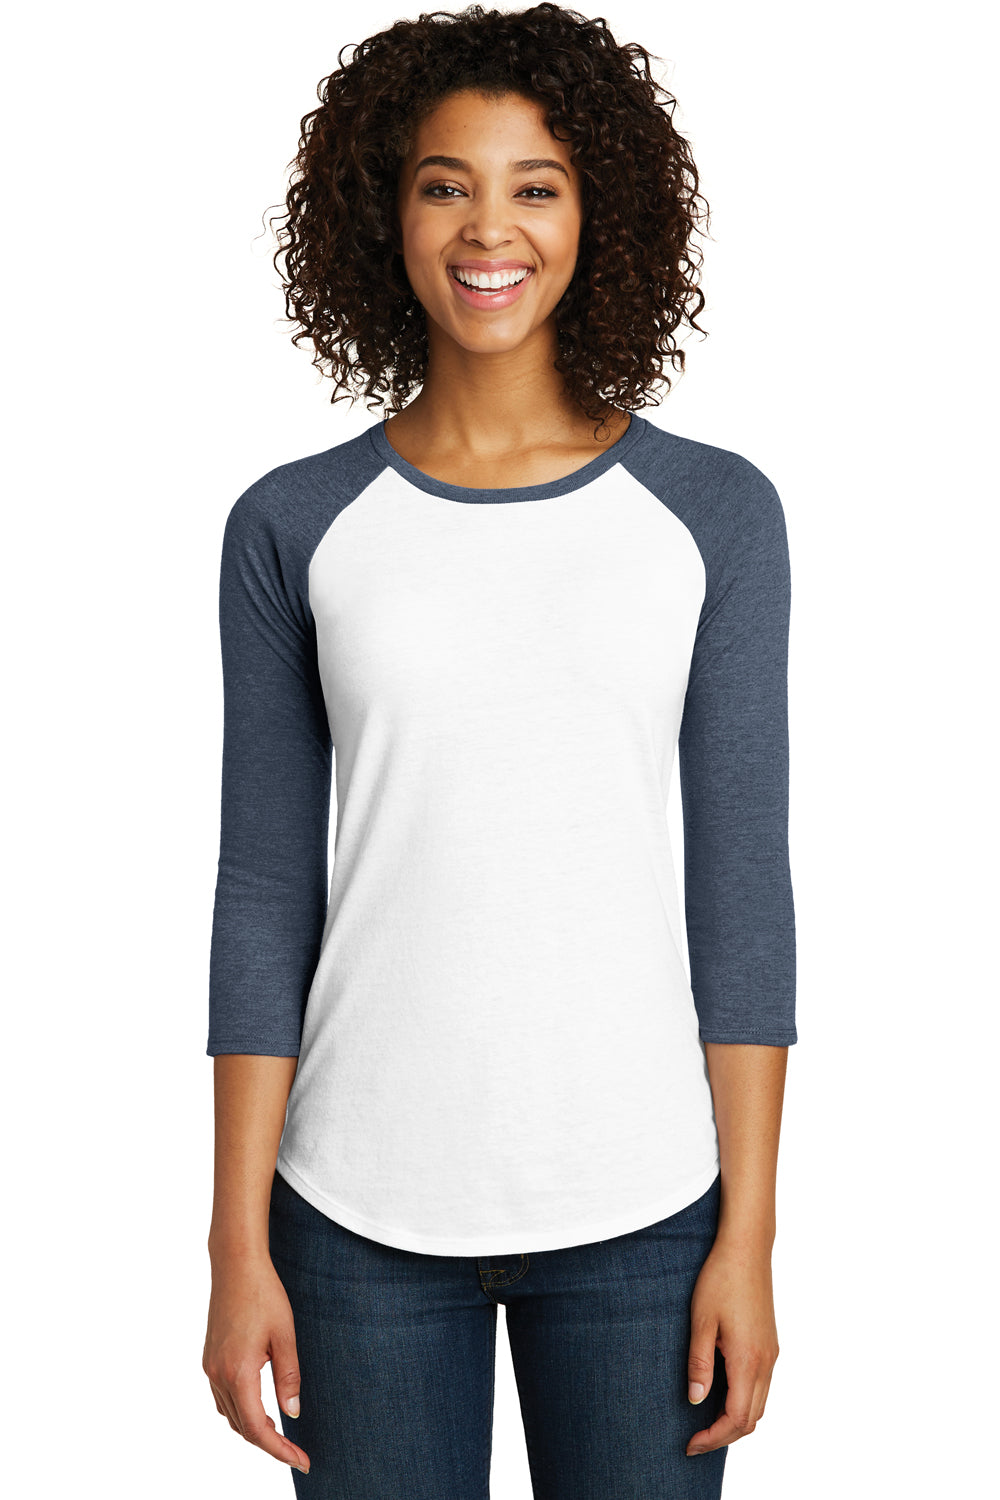 District DT6211 Womens Very Important 3/4 Sleeve Crewneck T-Shirt White/Heather Navy Blue Front